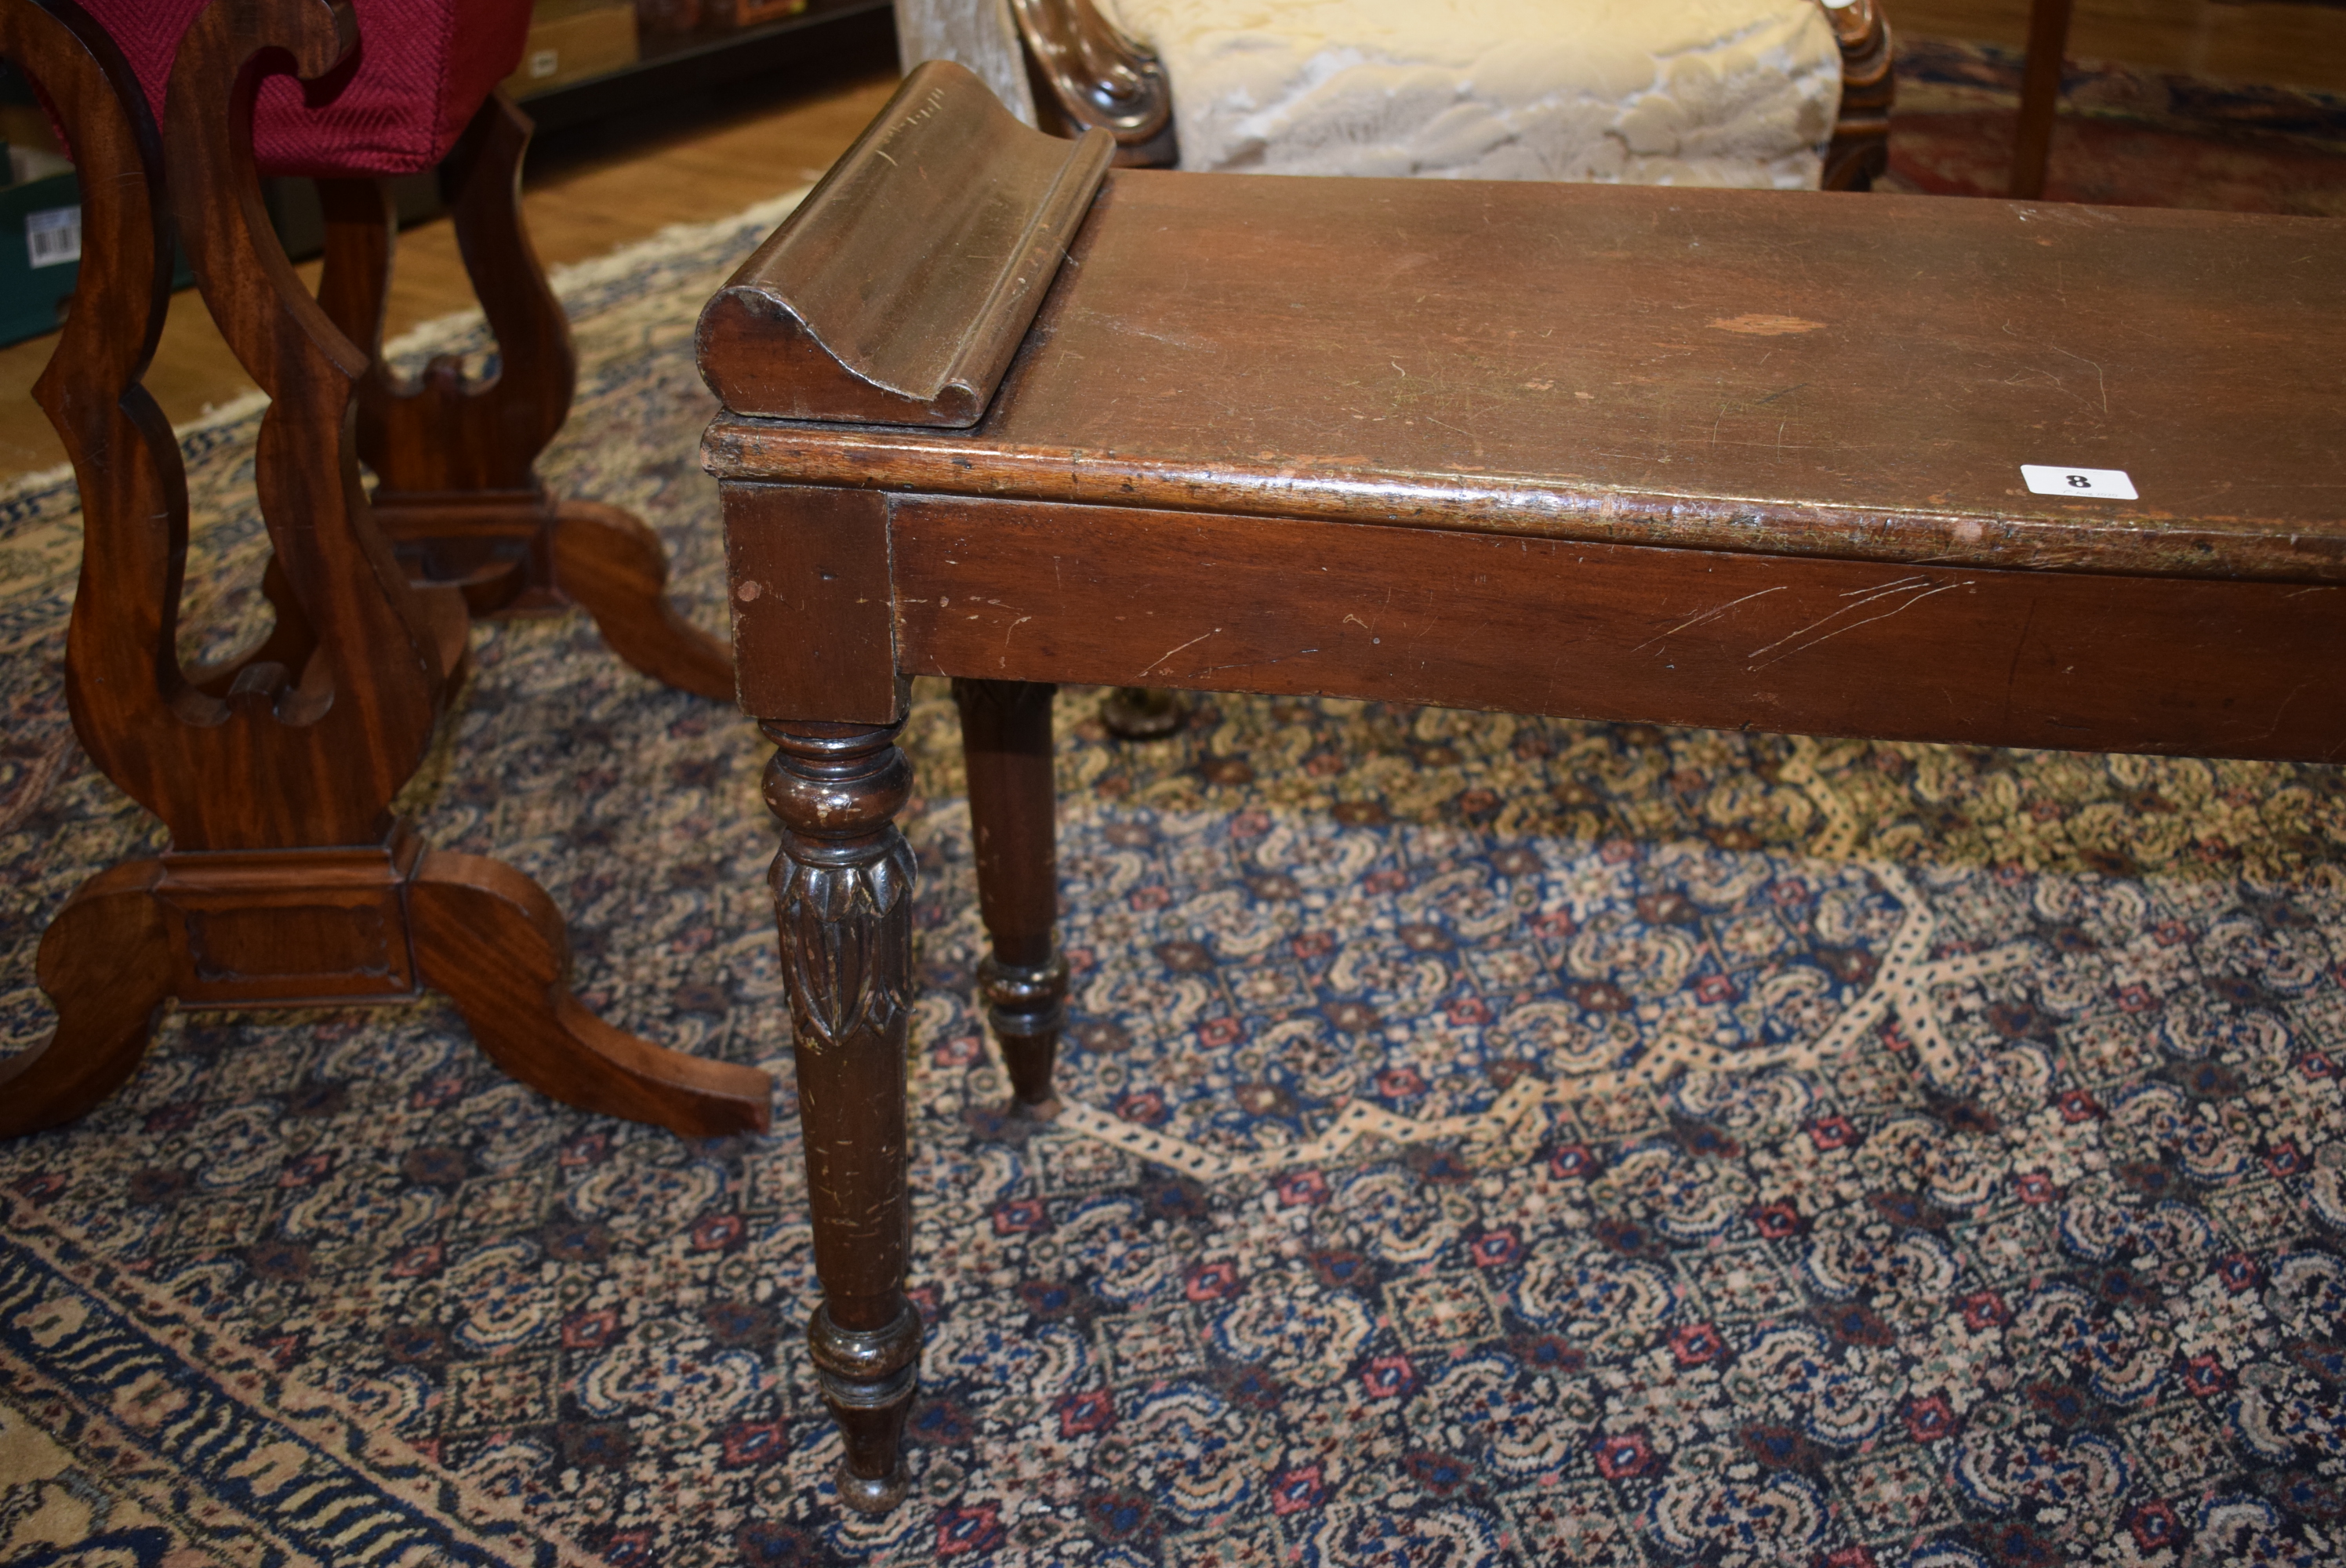 A late 19th century mahogany window seat with scrolled ends and turned legs with acanthus-leaf caps - Image 12 of 20